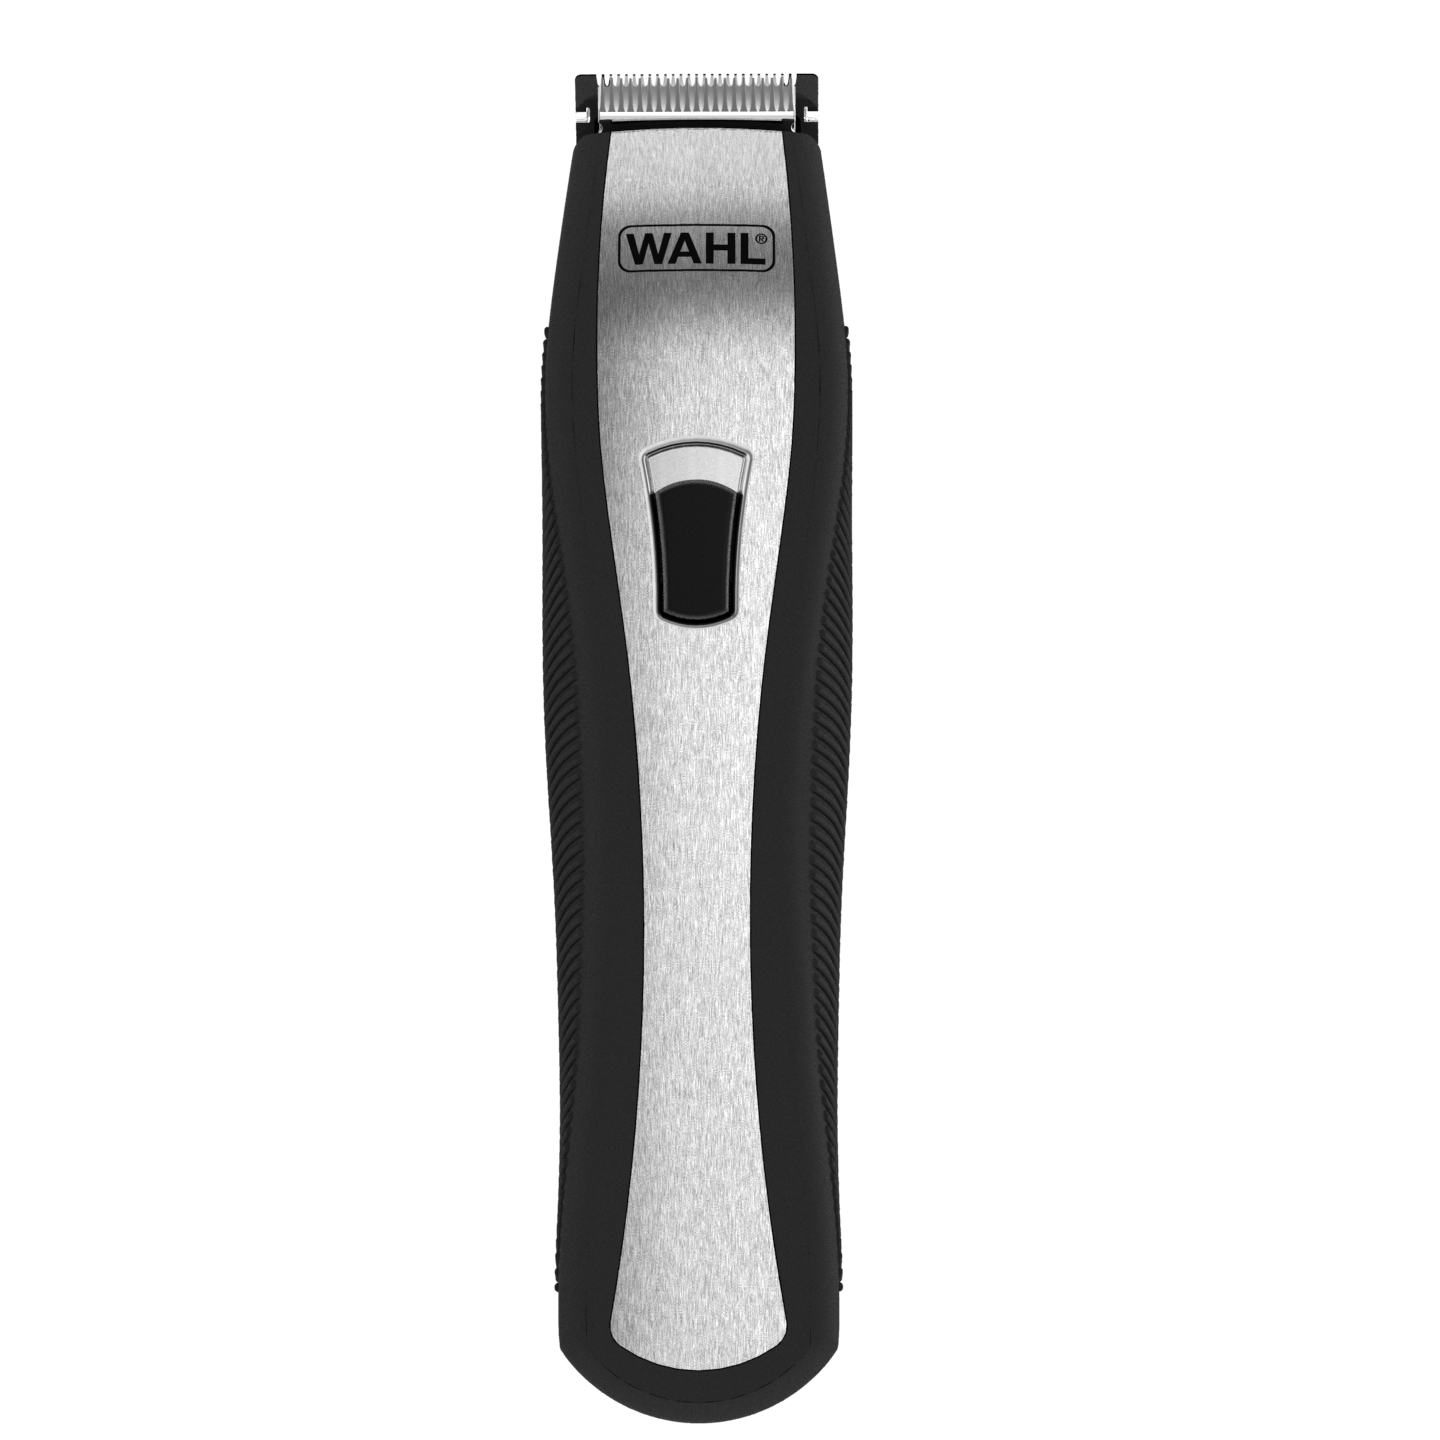 wahl trimming clippers